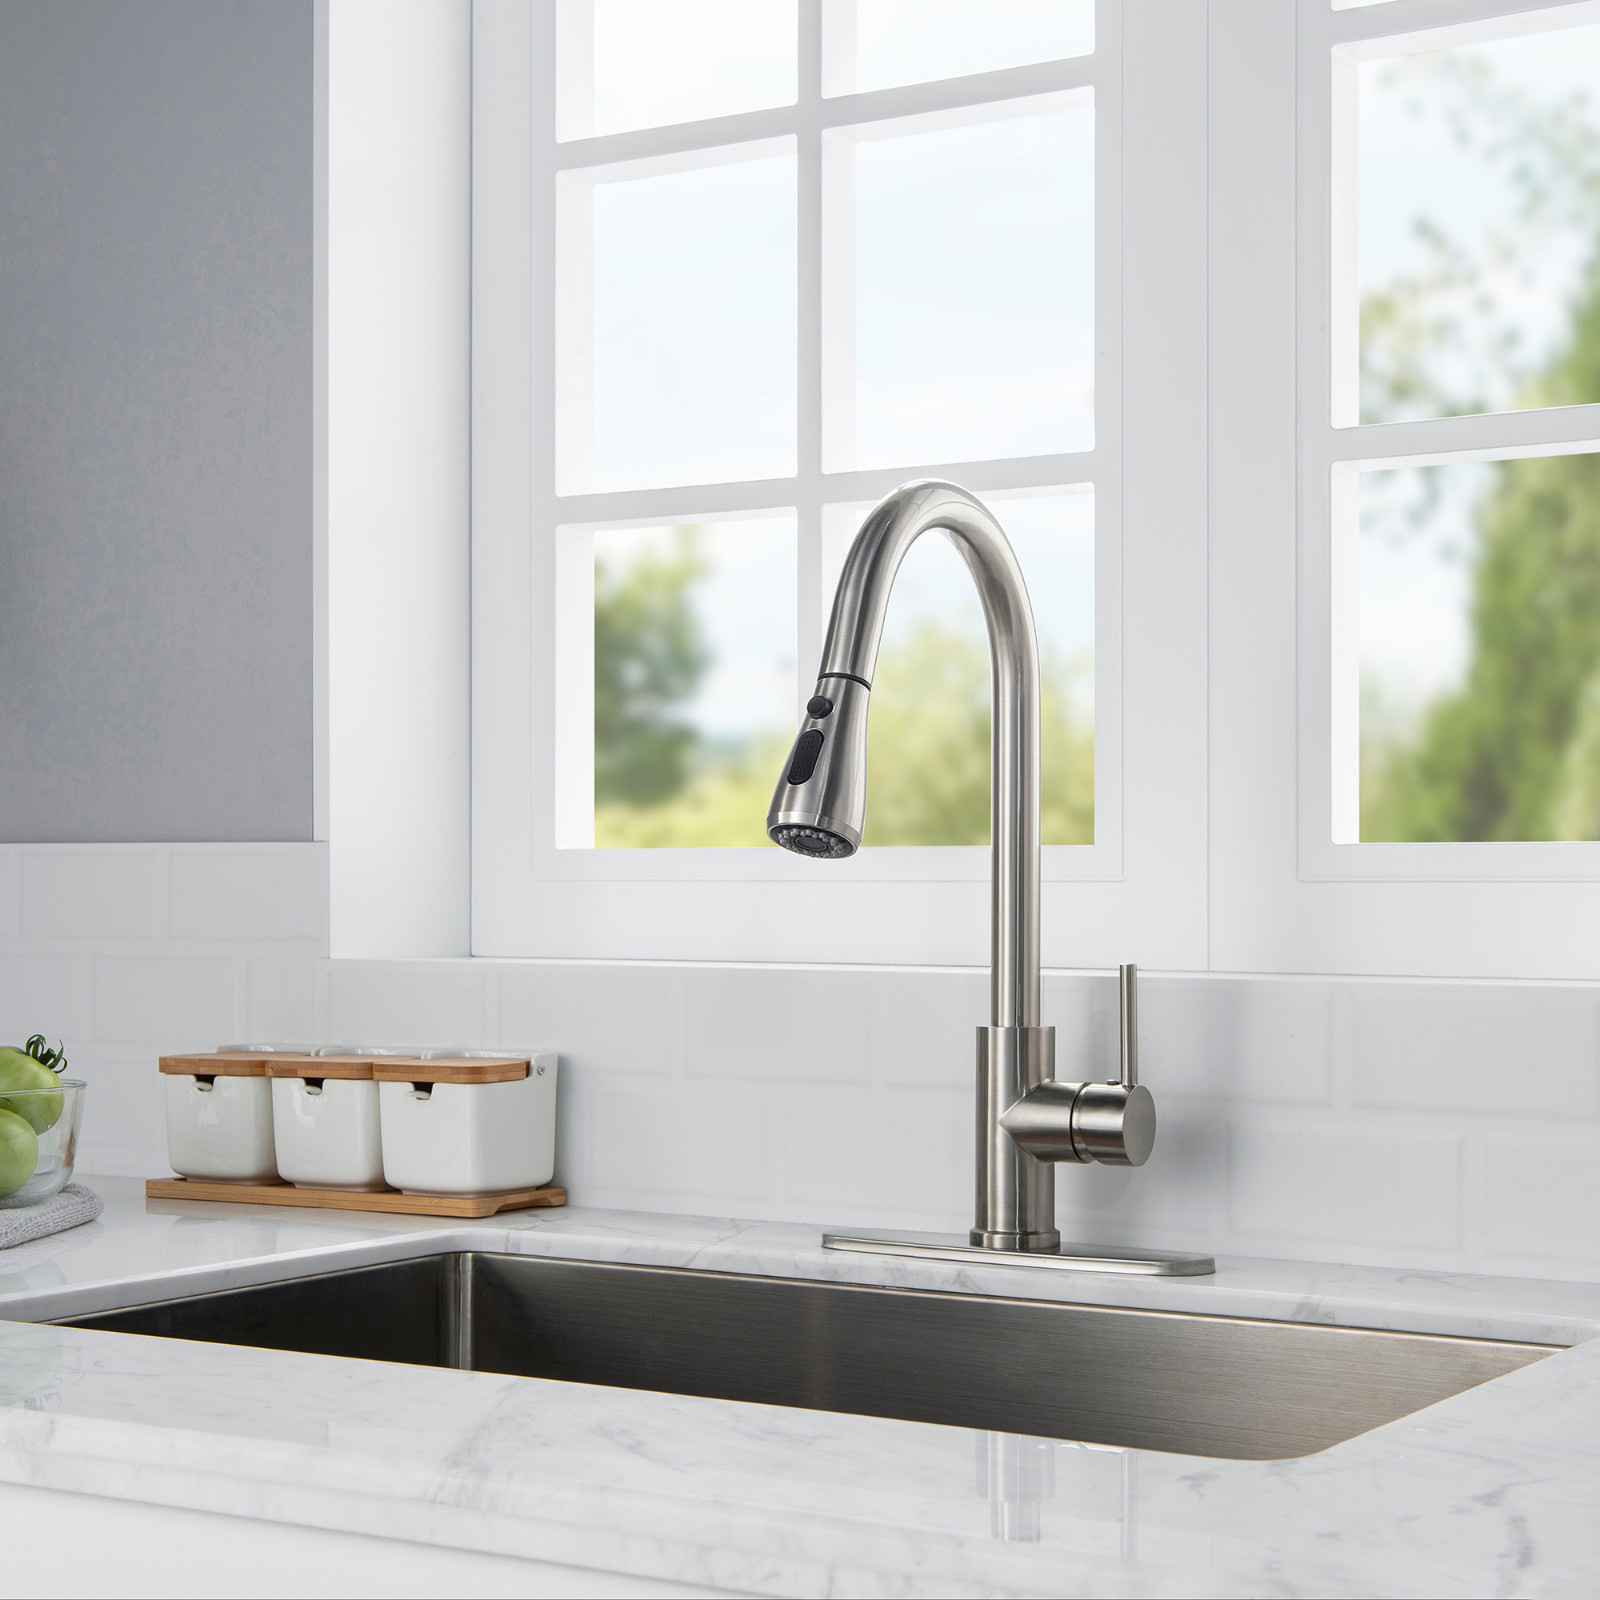  WOODBRIDGE WK090801BN Stainless Steel Single Handle Pull Down Kitchen Faucet in Brushed Nickel Finish._9390